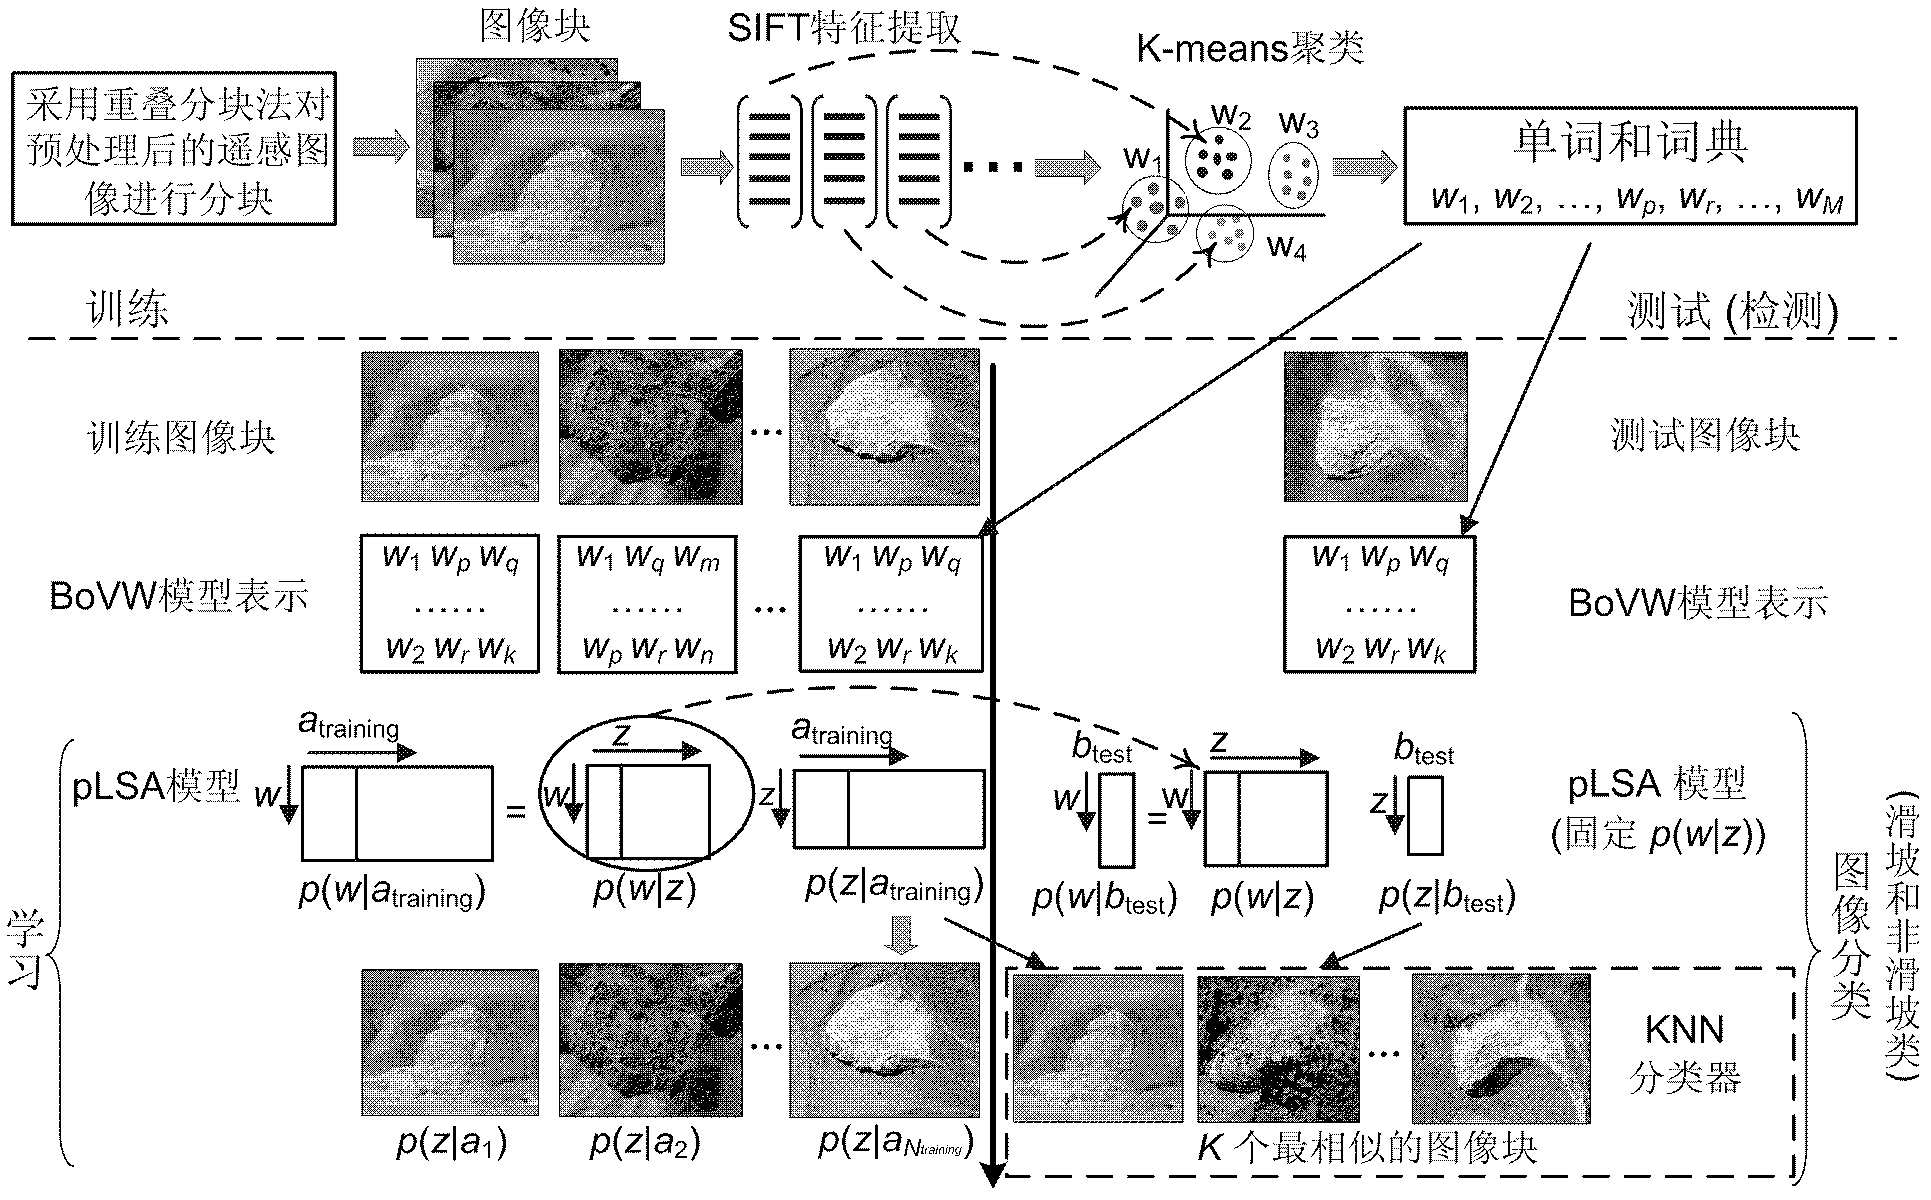 Method for detecting landslip from remotely sensed image by adopting image classification technology